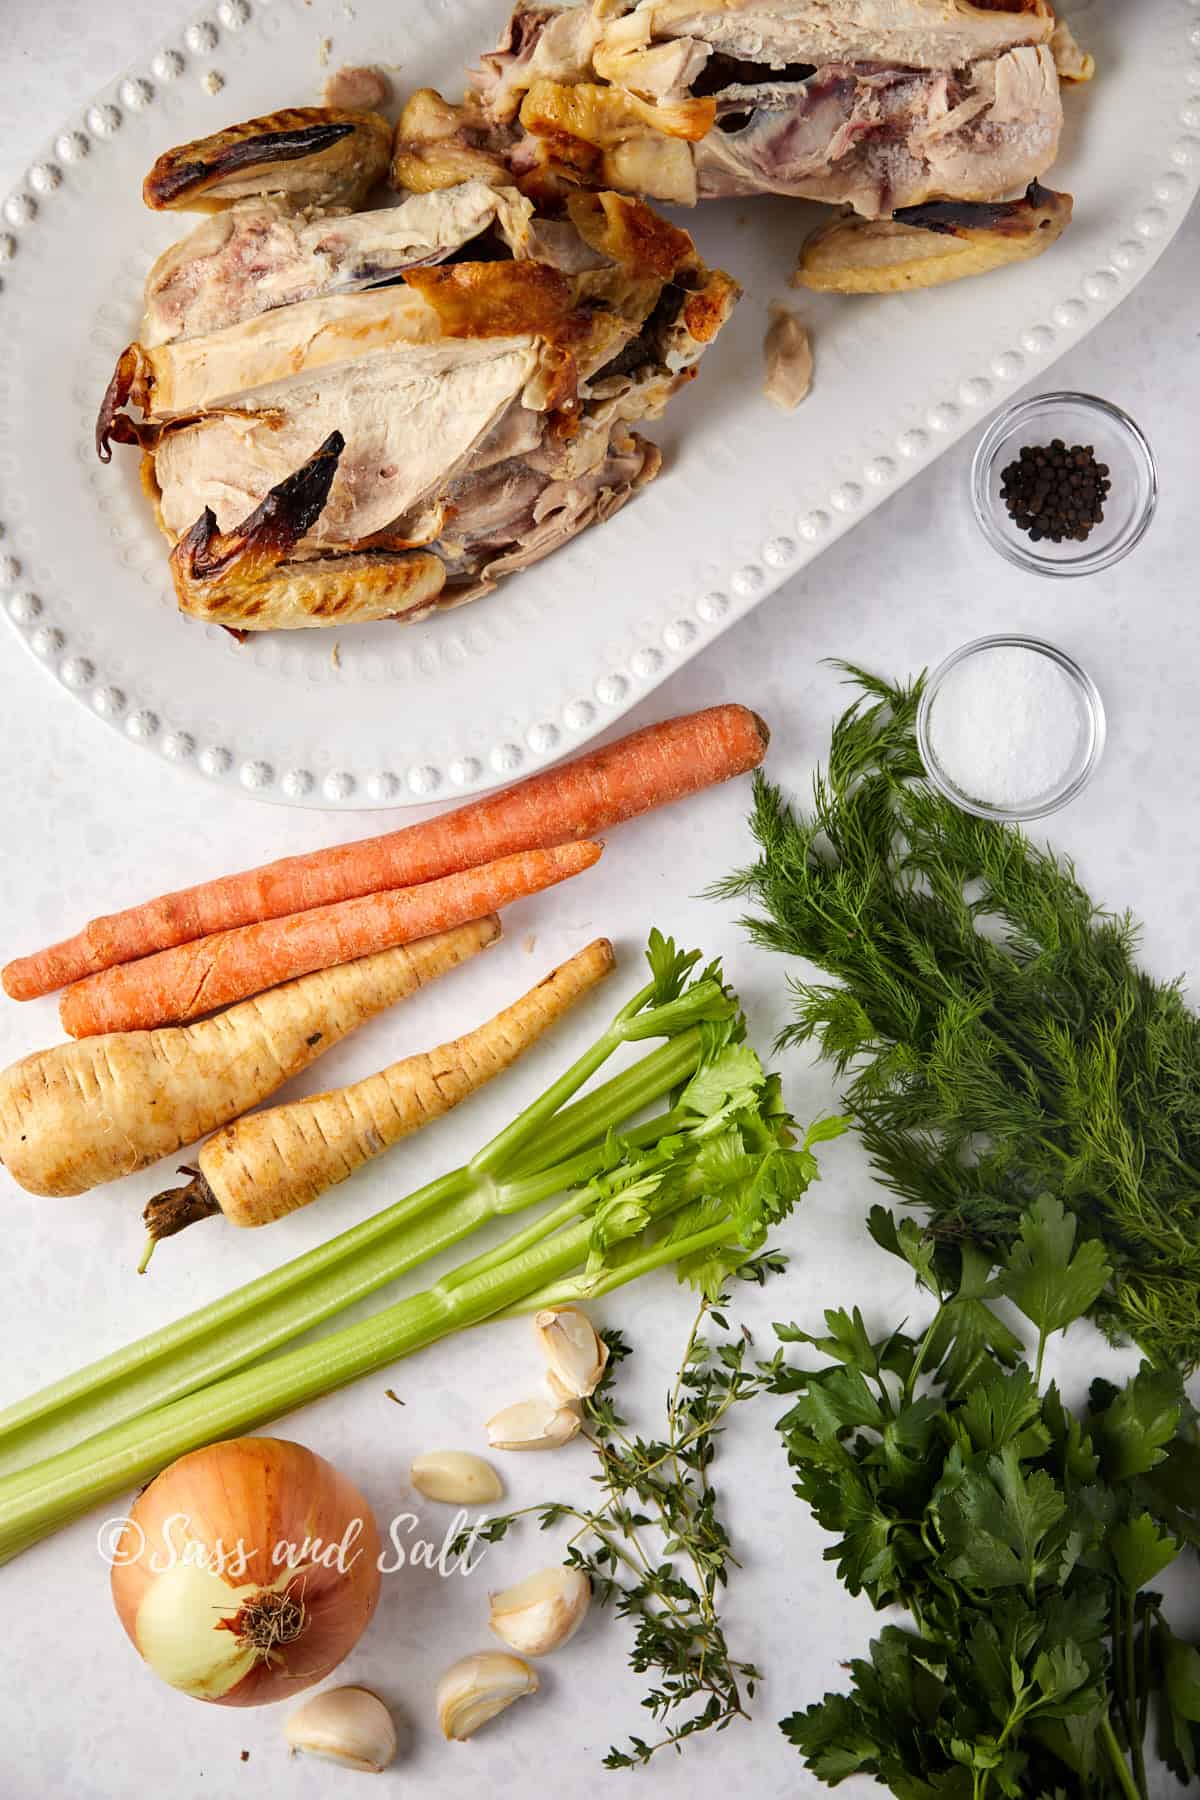 Overhead view of ingredients laid out on a white surface for making rotisserie chicken bone broth, including a white plate with leftover pieces of a rotisserie chicken, whole carrots, a bunch of celery, a large onion, several cloves of garlic, fresh herbs such as dill and parsley, and small bowls of salt and black peppercorns. The text "Sass and Salt" is overlaid at the bottom of the image.